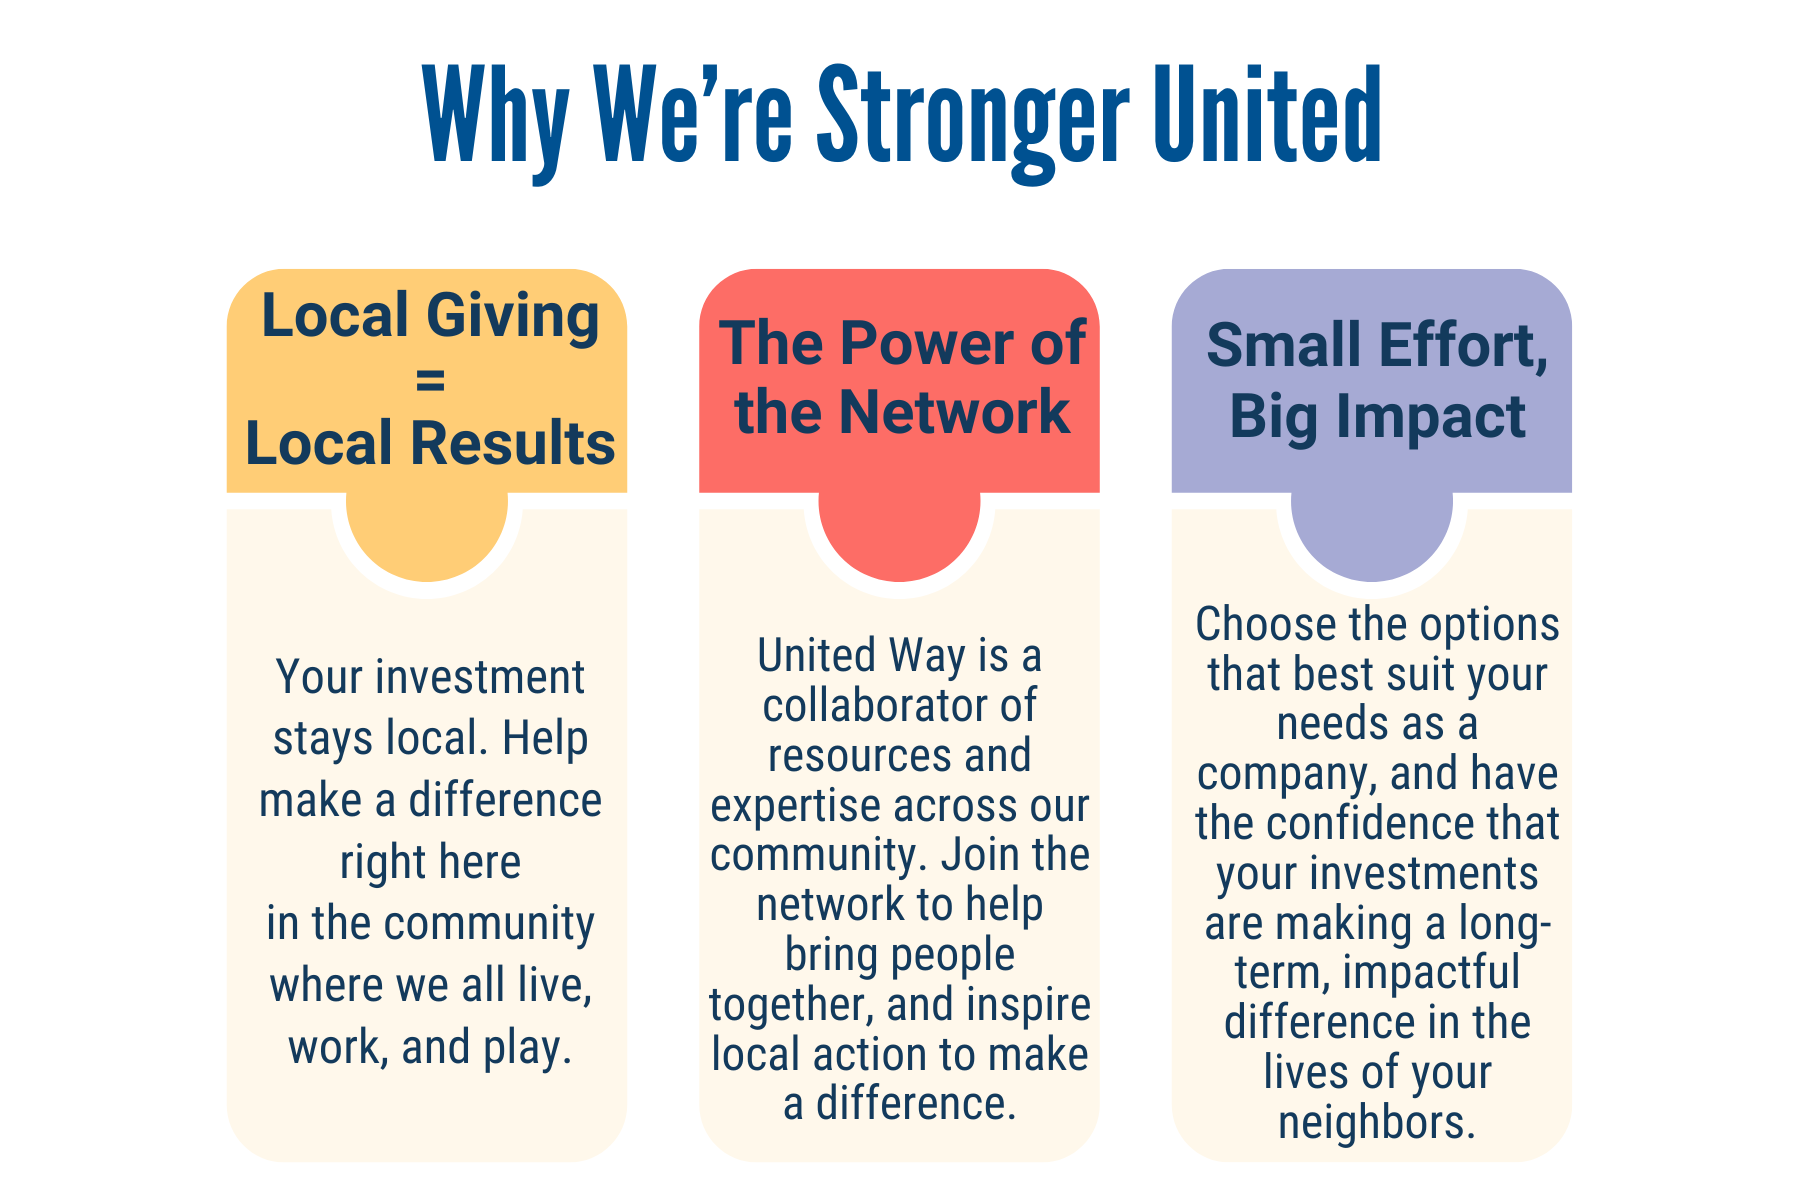 why we're stronger united image